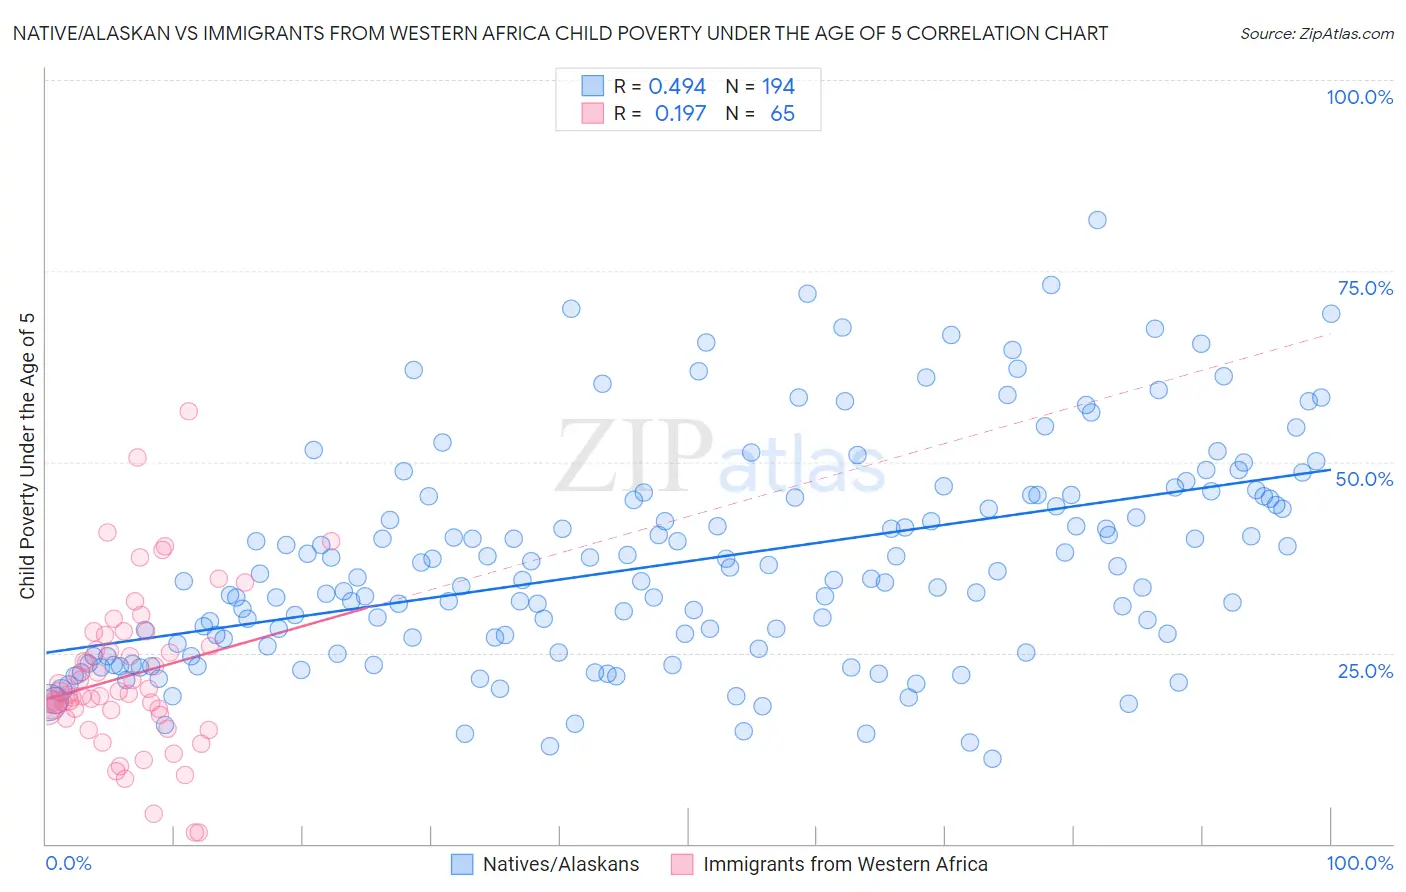 Native/Alaskan vs Immigrants from Western Africa Child Poverty Under the Age of 5